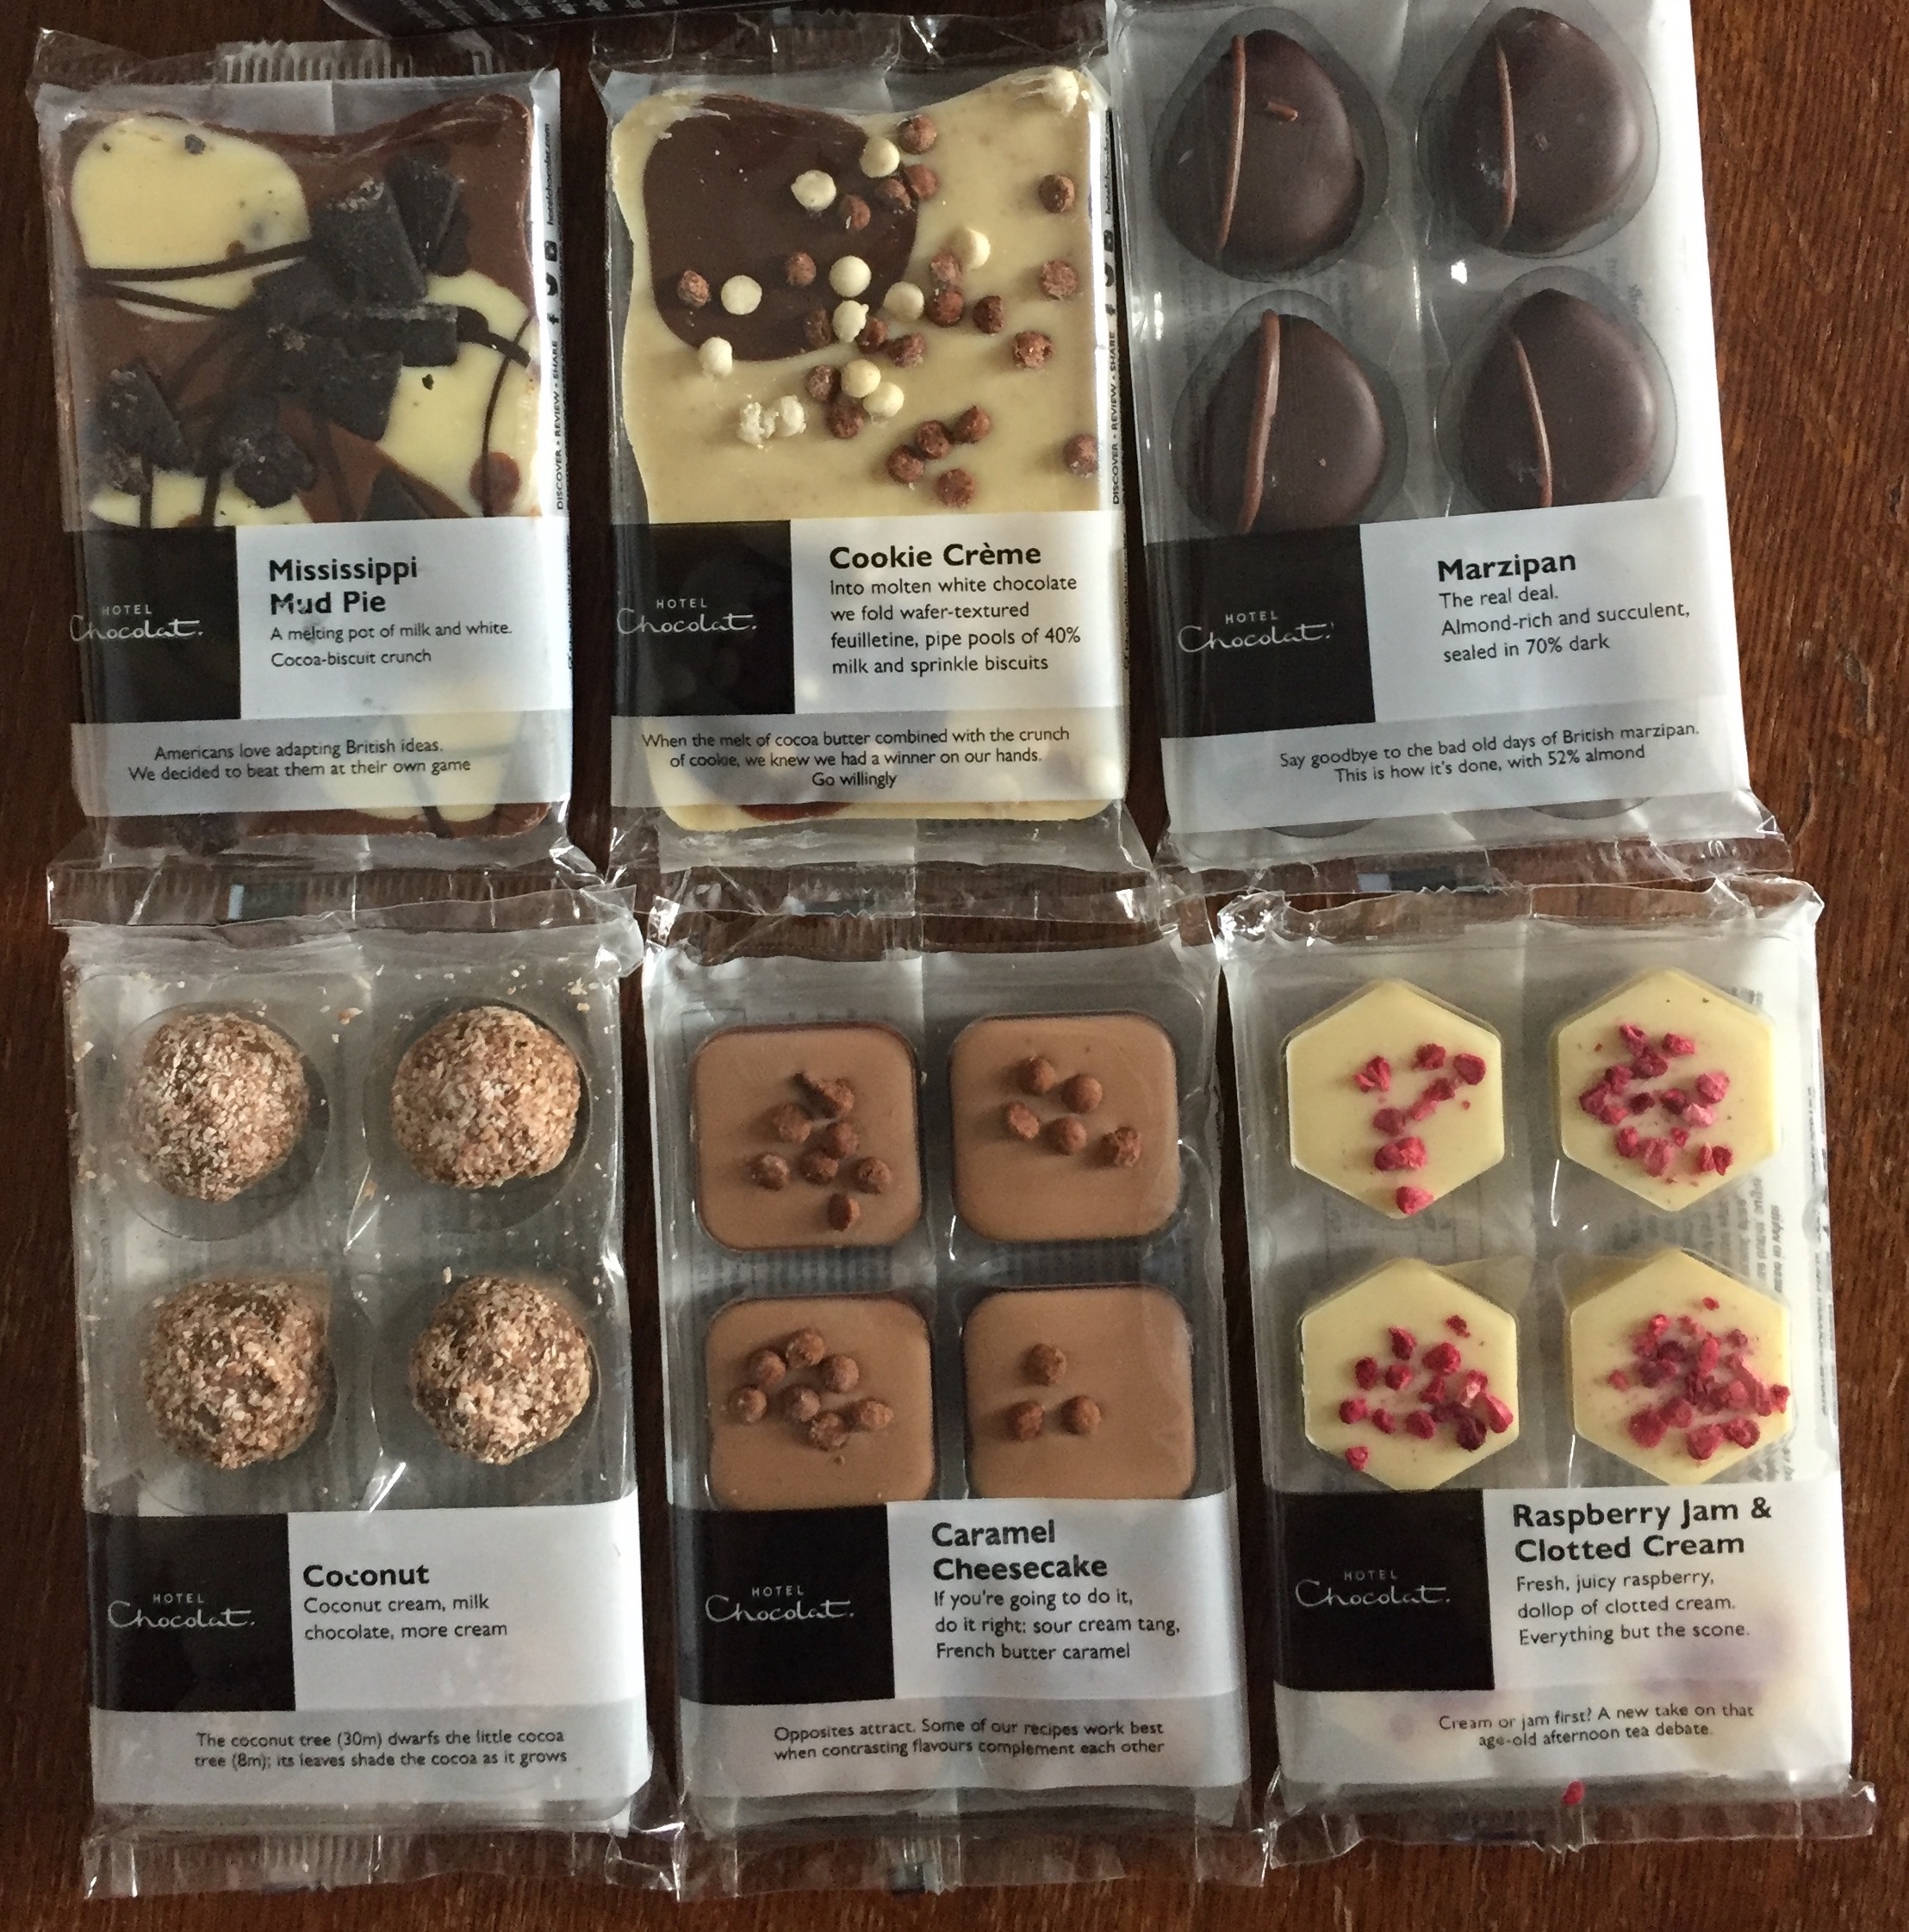 A selection of treats from Hotel Chocolat, including slabs of Mississippi Mud Pie and Cookie Crunch, and packs of 6 chocolates in the flavours of Marzipan, Coconut, Caramel Cheesecake and Raspberry Jam With Clotted Cream.